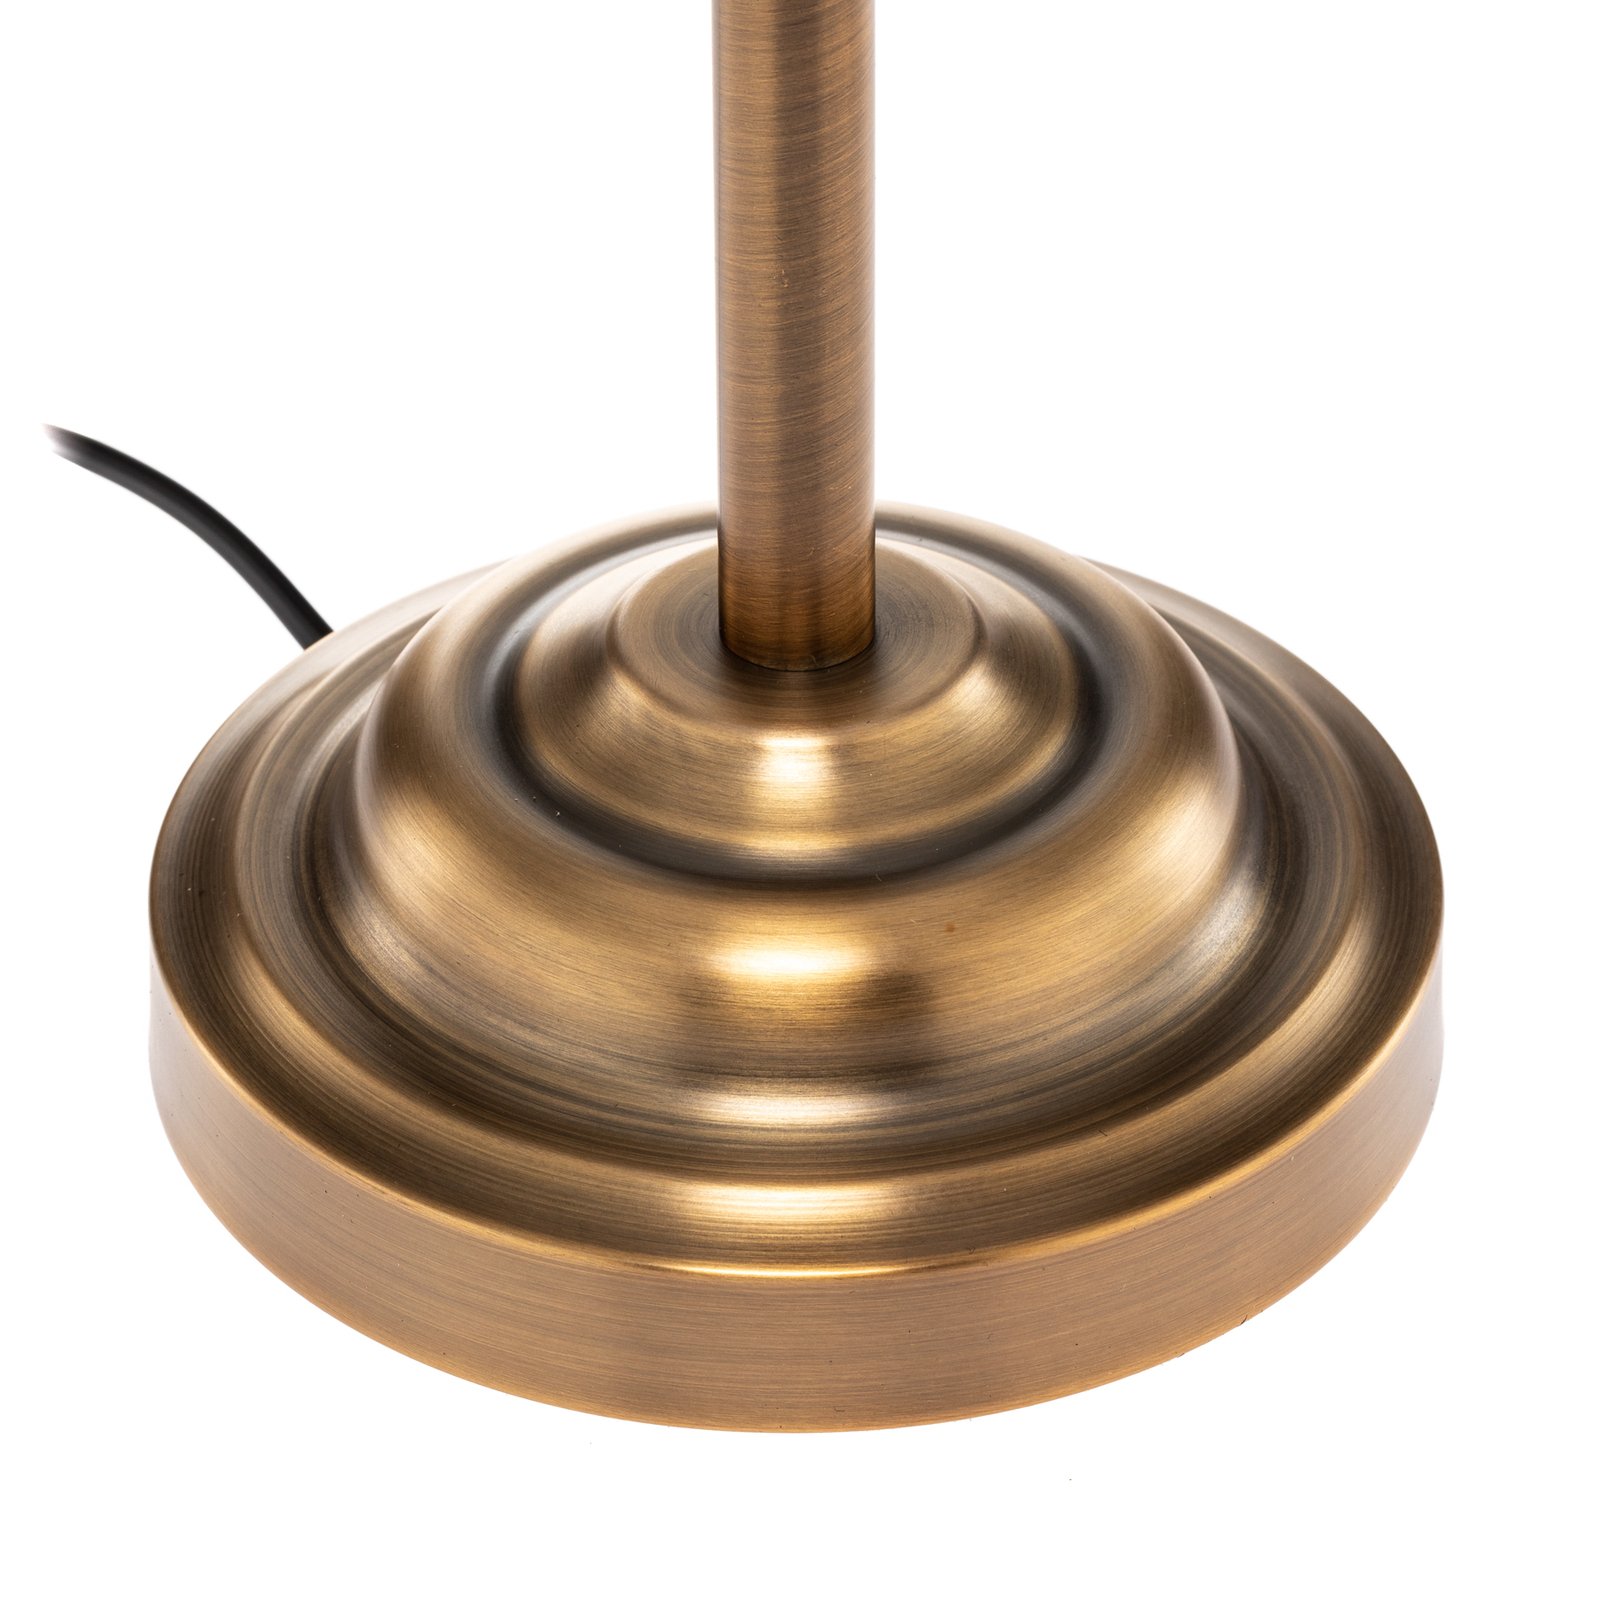 Lindby Alomira table lamp, 52 cm, brass